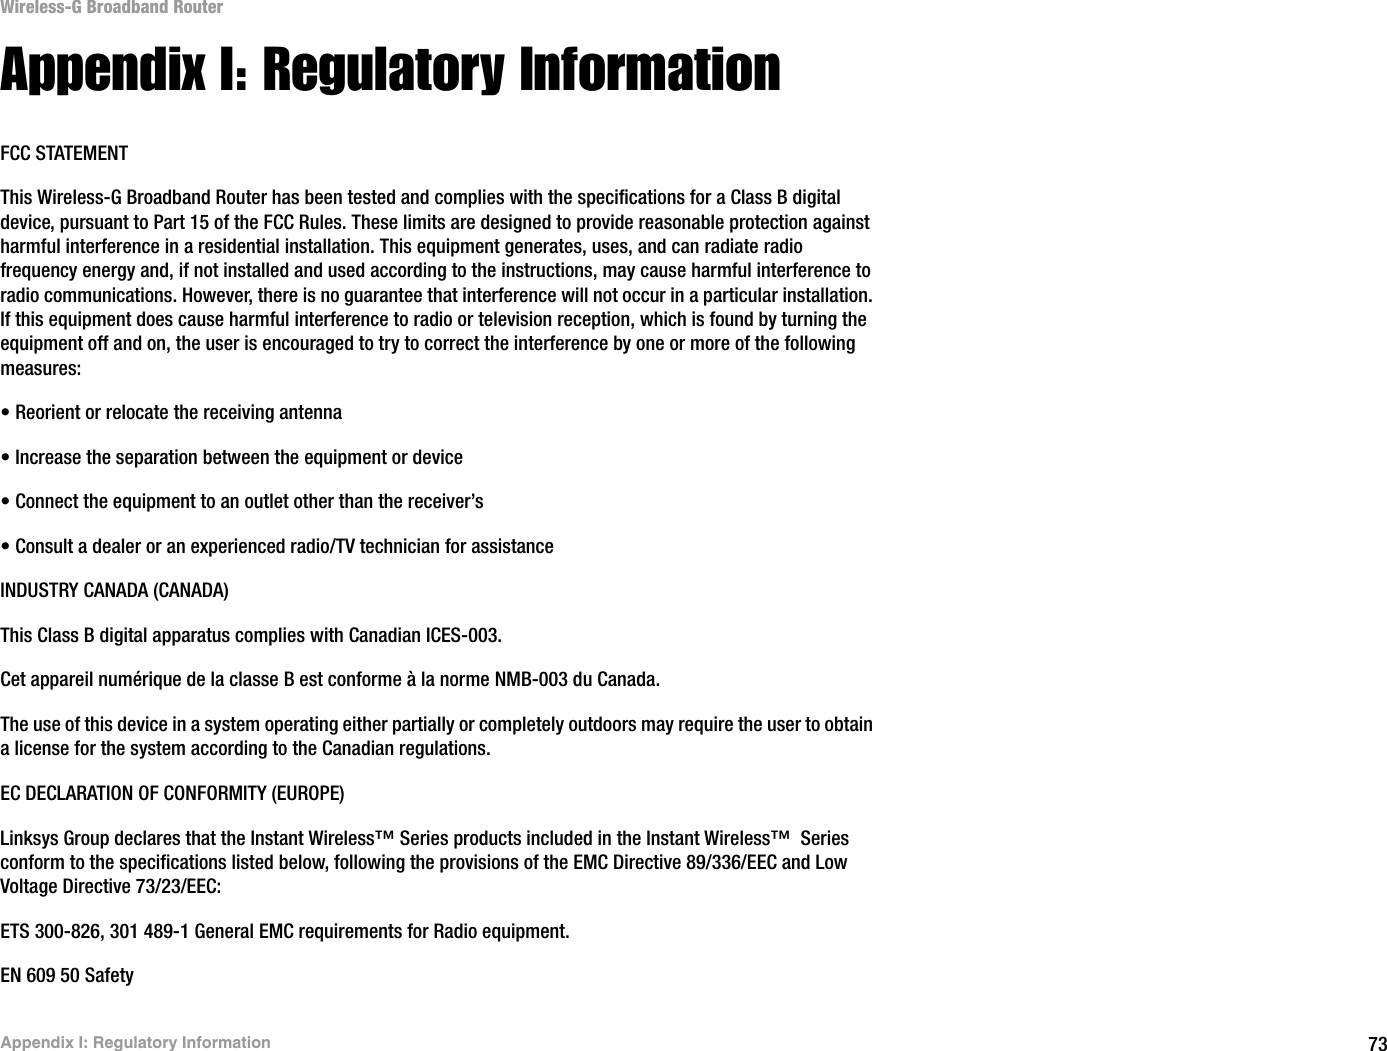 73Appendix I: Regulatory InformationWireless-G Broadband RouterAppendix I: Regulatory InformationFCC STATEMENTThis Wireless-G Broadband Router has been tested and complies with the specifications for a Class B digital device, pursuant to Part 15 of the FCC Rules. These limits are designed to provide reasonable protection against harmful interference in a residential installation. This equipment generates, uses, and can radiate radio frequency energy and, if not installed and used according to the instructions, may cause harmful interference to radio communications. However, there is no guarantee that interference will not occur in a particular installation. If this equipment does cause harmful interference to radio or television reception, which is found by turning the equipment off and on, the user is encouraged to try to correct the interference by one or more of the following measures:• Reorient or relocate the receiving antenna• Increase the separation between the equipment or device• Connect the equipment to an outlet other than the receiver’s• Consult a dealer or an experienced radio/TV technician for assistanceINDUSTRY CANADA (CANADA)This Class B digital apparatus complies with Canadian ICES-003.Cet appareil numérique de la classe B est conforme à la norme NMB-003 du Canada.The use of this device in a system operating either partially or completely outdoors may require the user to obtain a license for the system according to the Canadian regulations.EC DECLARATION OF CONFORMITY (EUROPE)Linksys Group declares that the Instant Wireless™ Series products included in the Instant Wireless™  Series conform to the specifications listed below, following the provisions of the EMC Directive 89/336/EEC and Low Voltage Directive 73/23/EEC:ETS 300-826, 301 489-1 General EMC requirements for Radio equipment.EN 609 50 Safety